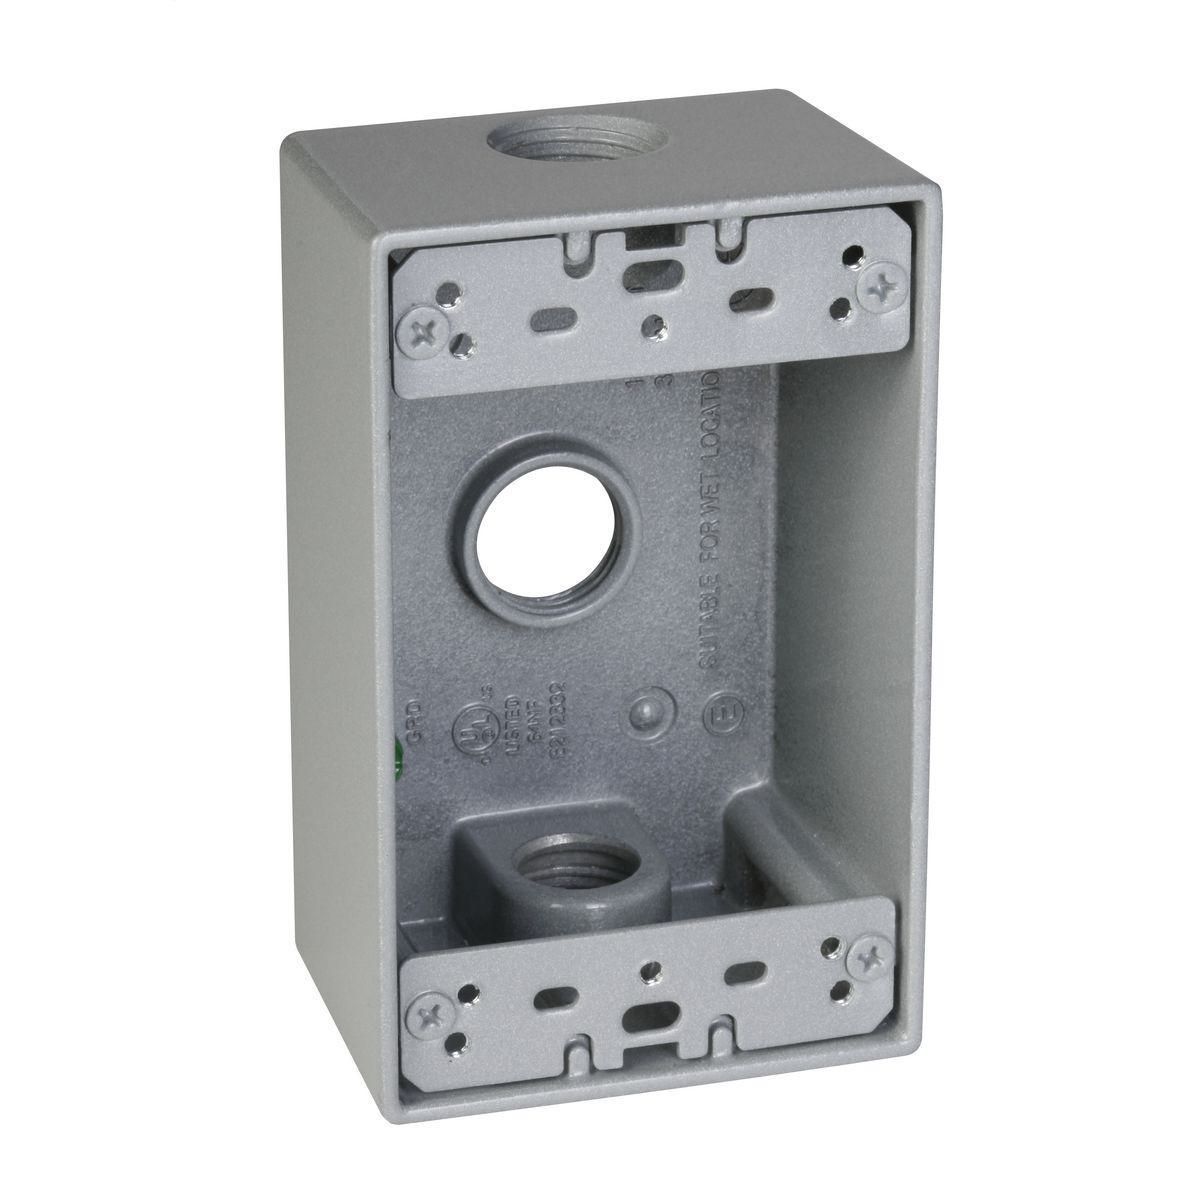 TAY SB350S 1G WP BOX (3) 1/2 IN. OUTLETS - GRAY